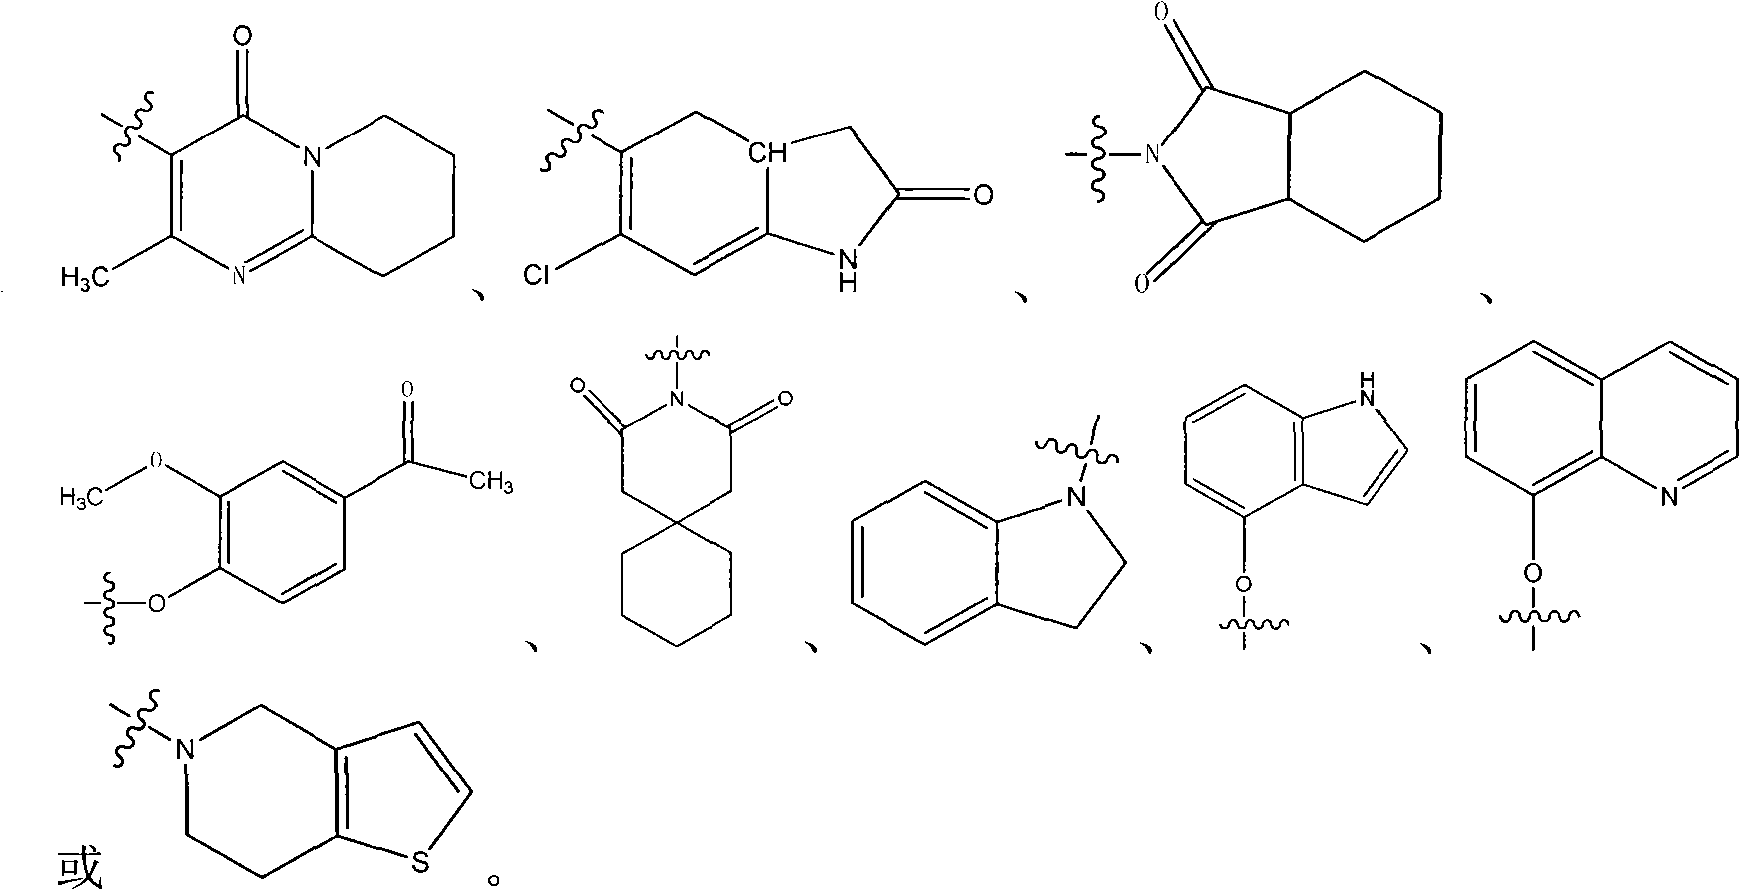 N-aryl piperazine derivative having double activity of dopamine D2 and 5-HT2a